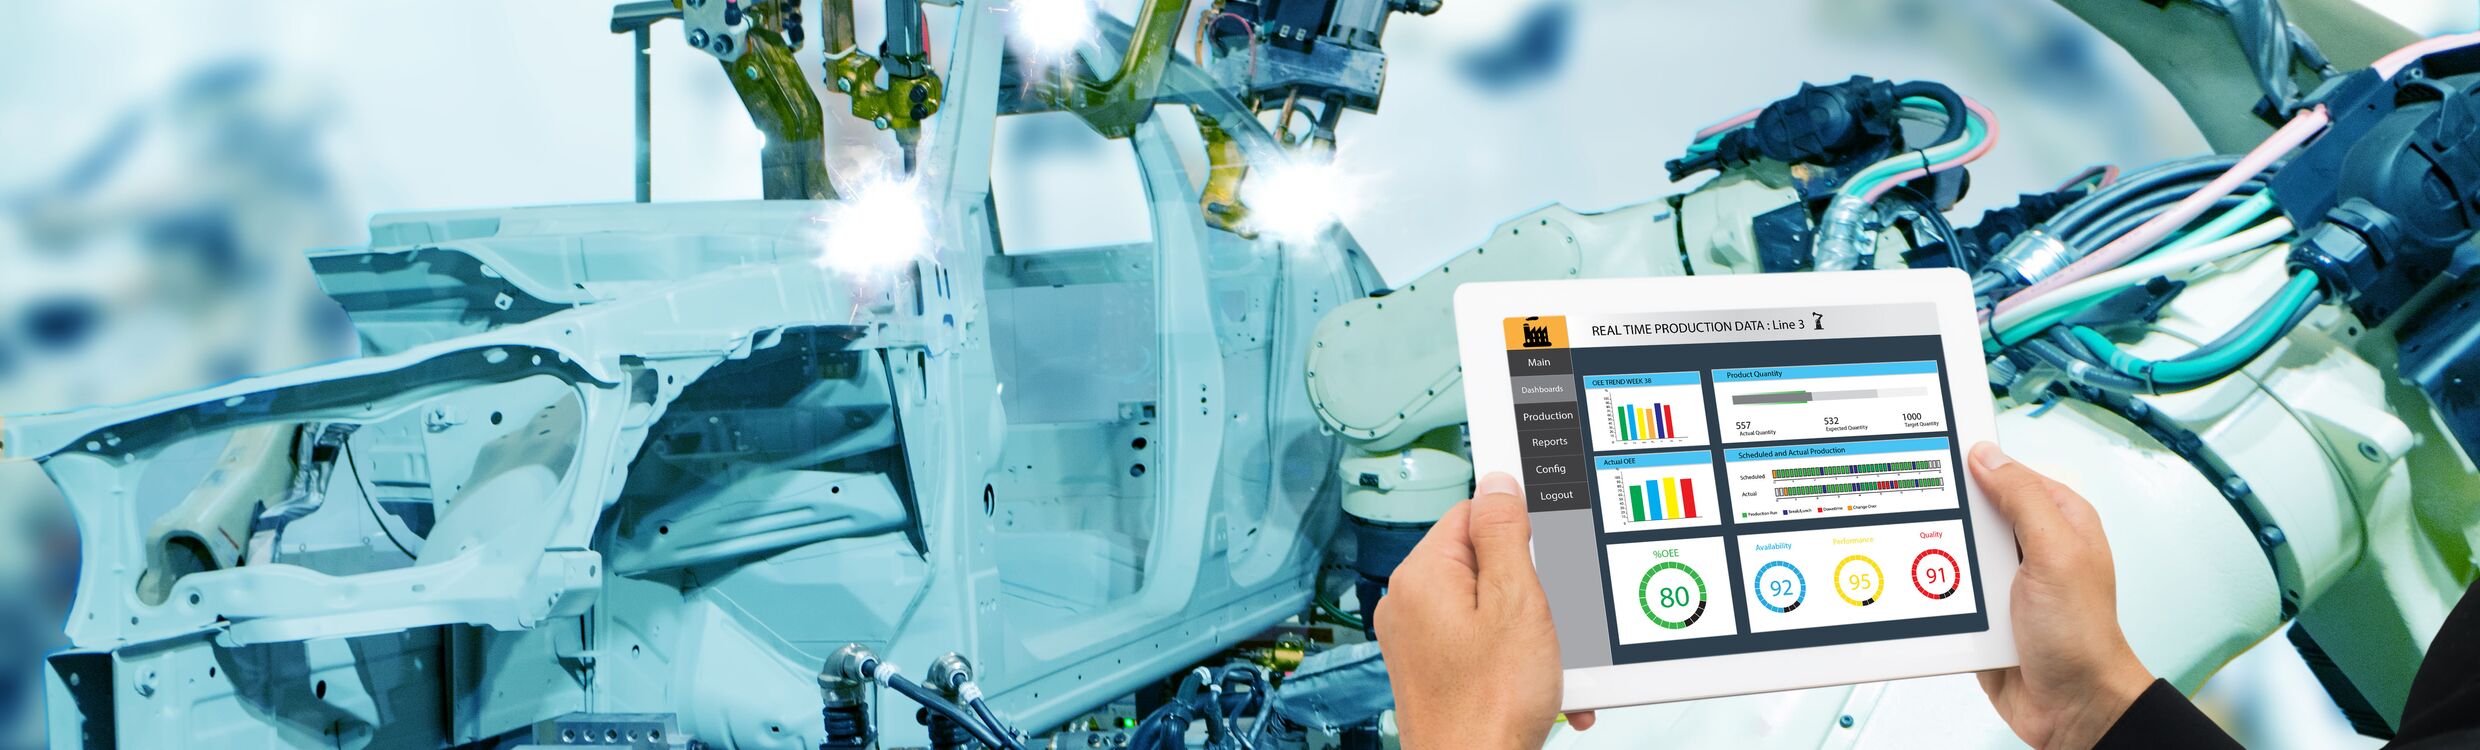 Manufacturing worker highlighting industry 4.0 experience with Real-time monitoring solution for machine data